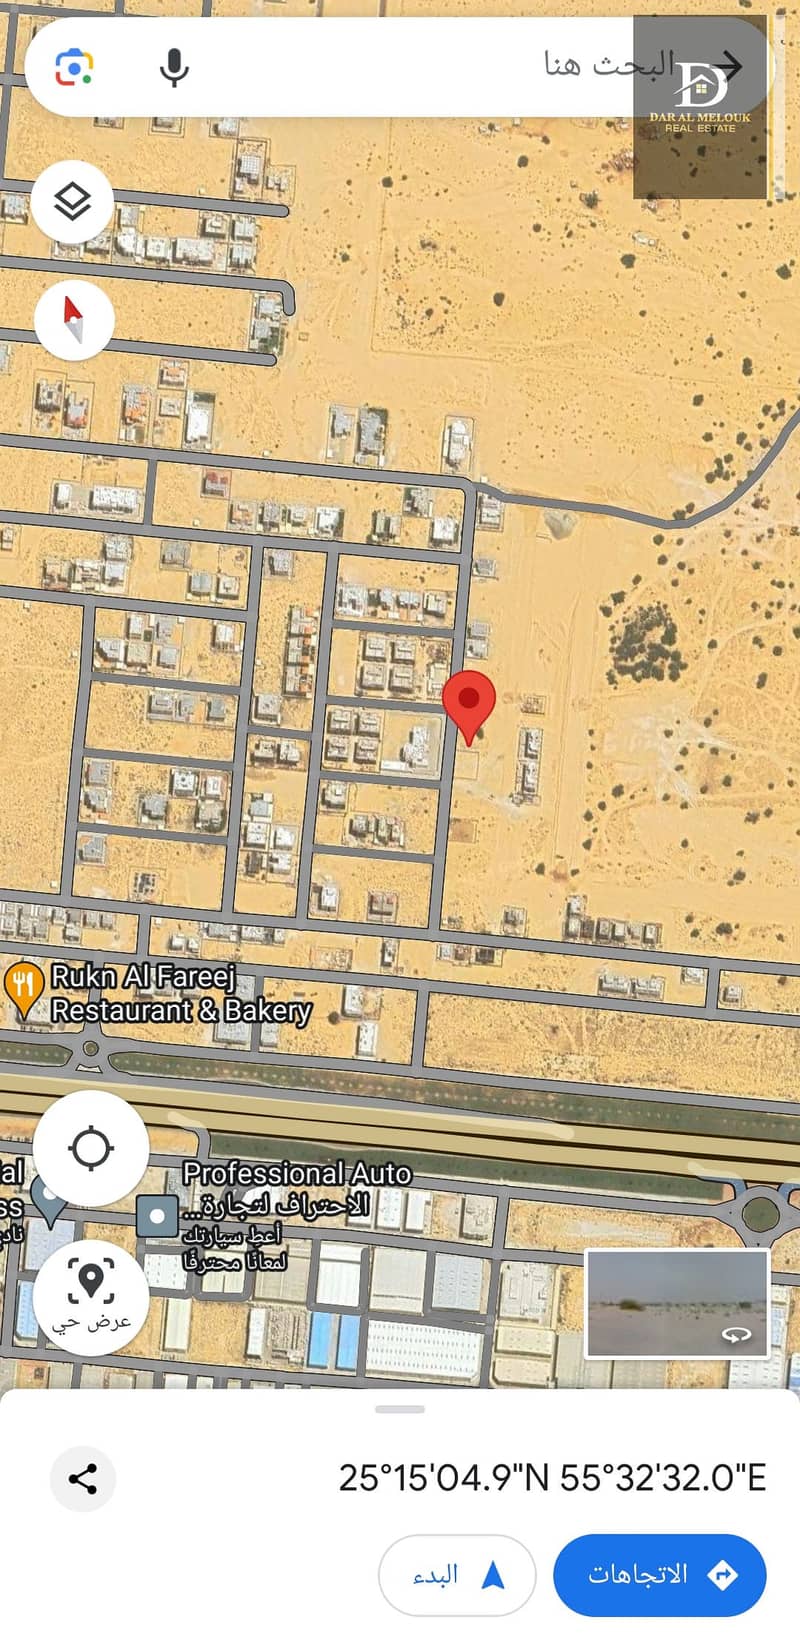 For sale in Sharjah, Al-Hoshi area, residential and investment land, area of ​​4200 feet, permit for a ground villa and the first distinctive location, close to services. The land is ready for construction directly. The Al-Hoshi area is characterized by e